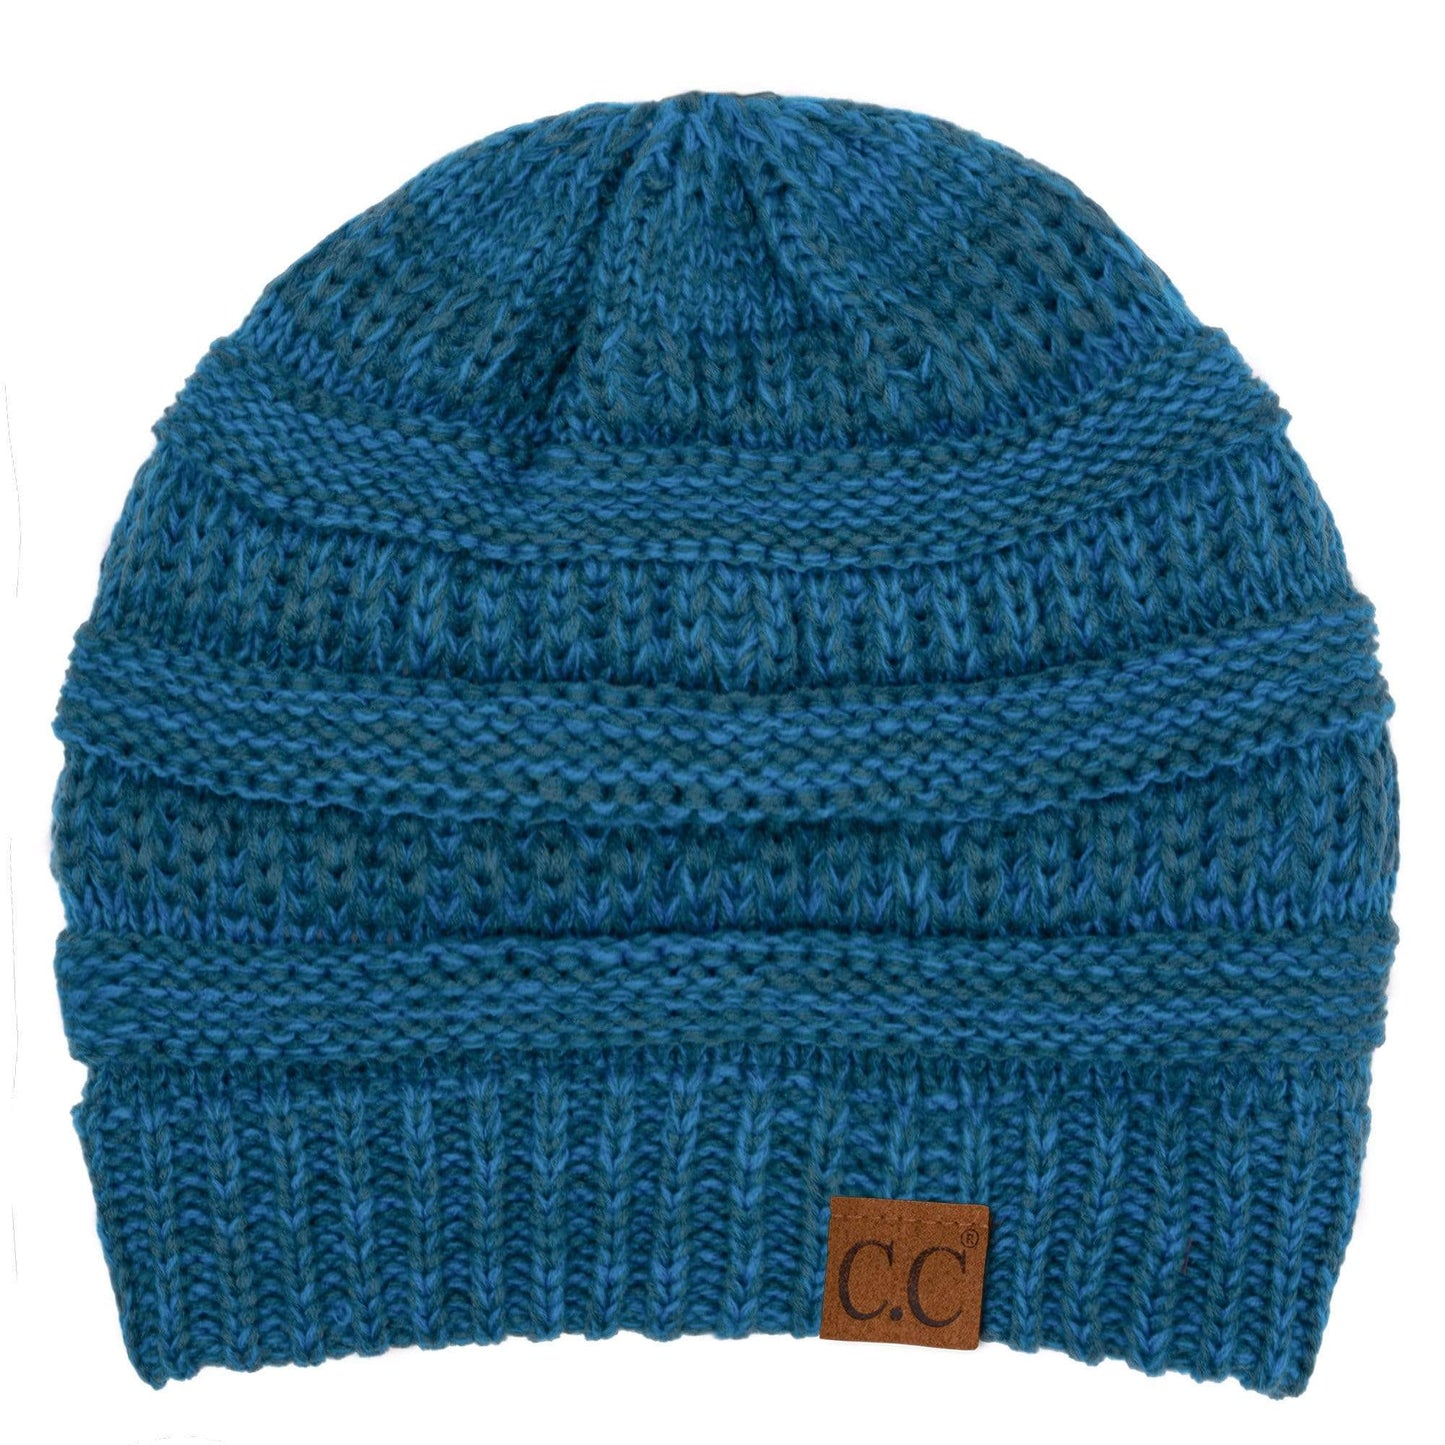 Keebon International Apparel Teal/Blue C.C Trendy Warm Chunky Soft Stretch Two-Toned Cable Knit Beanie Skully